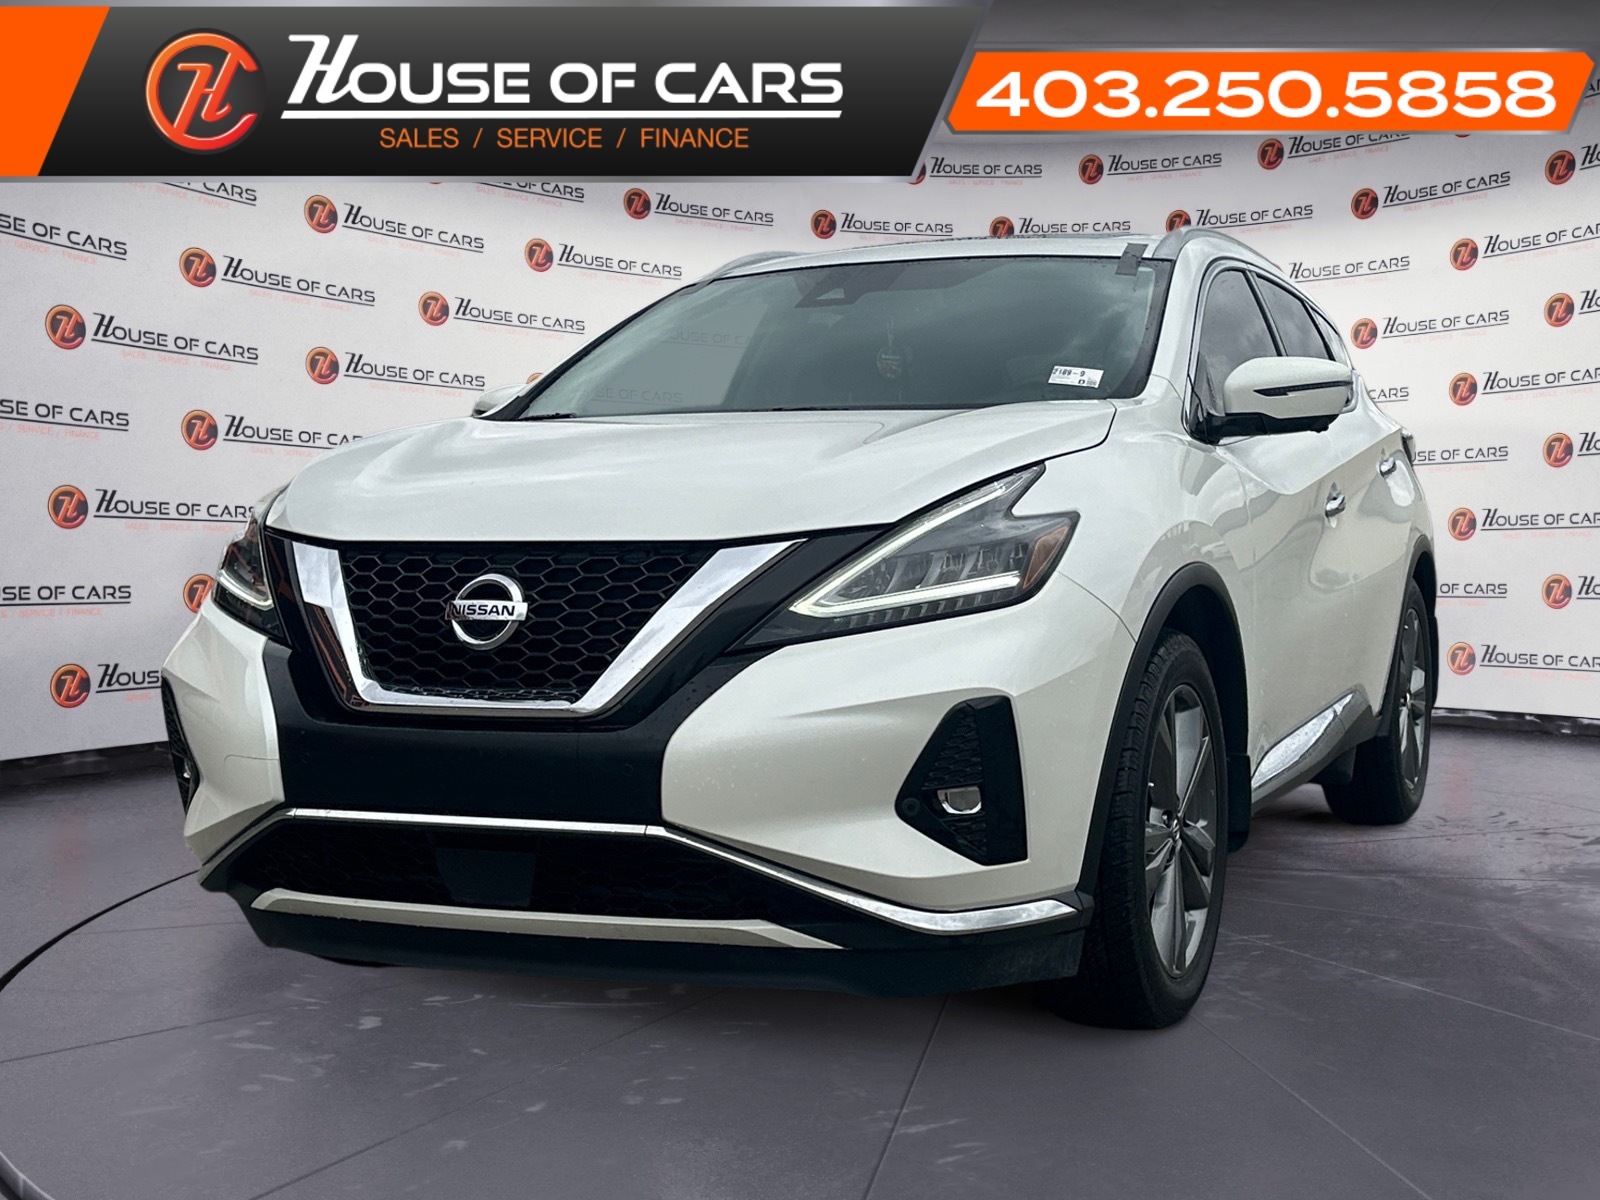 2019 Nissan Murano AWD Platinum WITH HEATED SEATS ANS STEERING